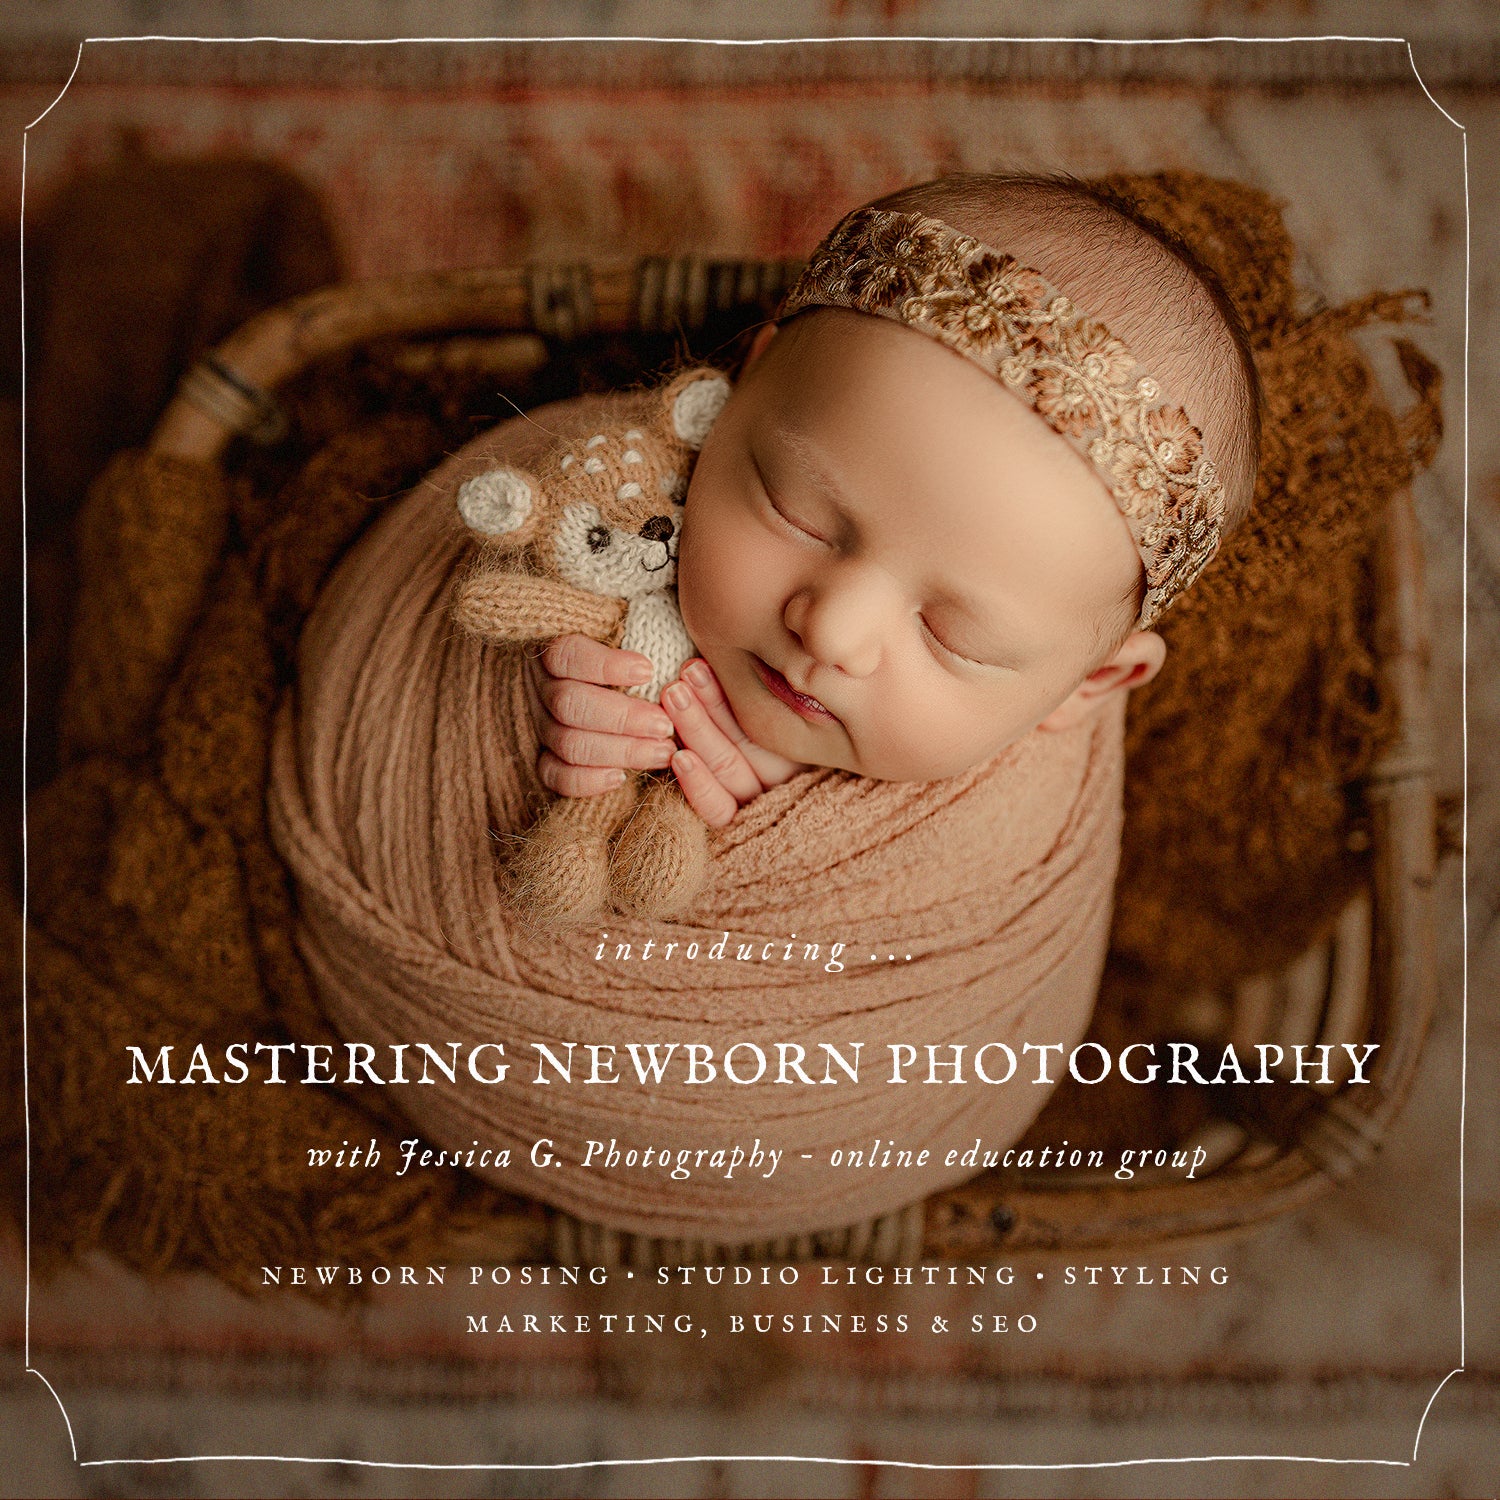 Newborn Photography Education Online Workshop for Newborn Photographers Learn Newborn Photography with Jessica G. Photography